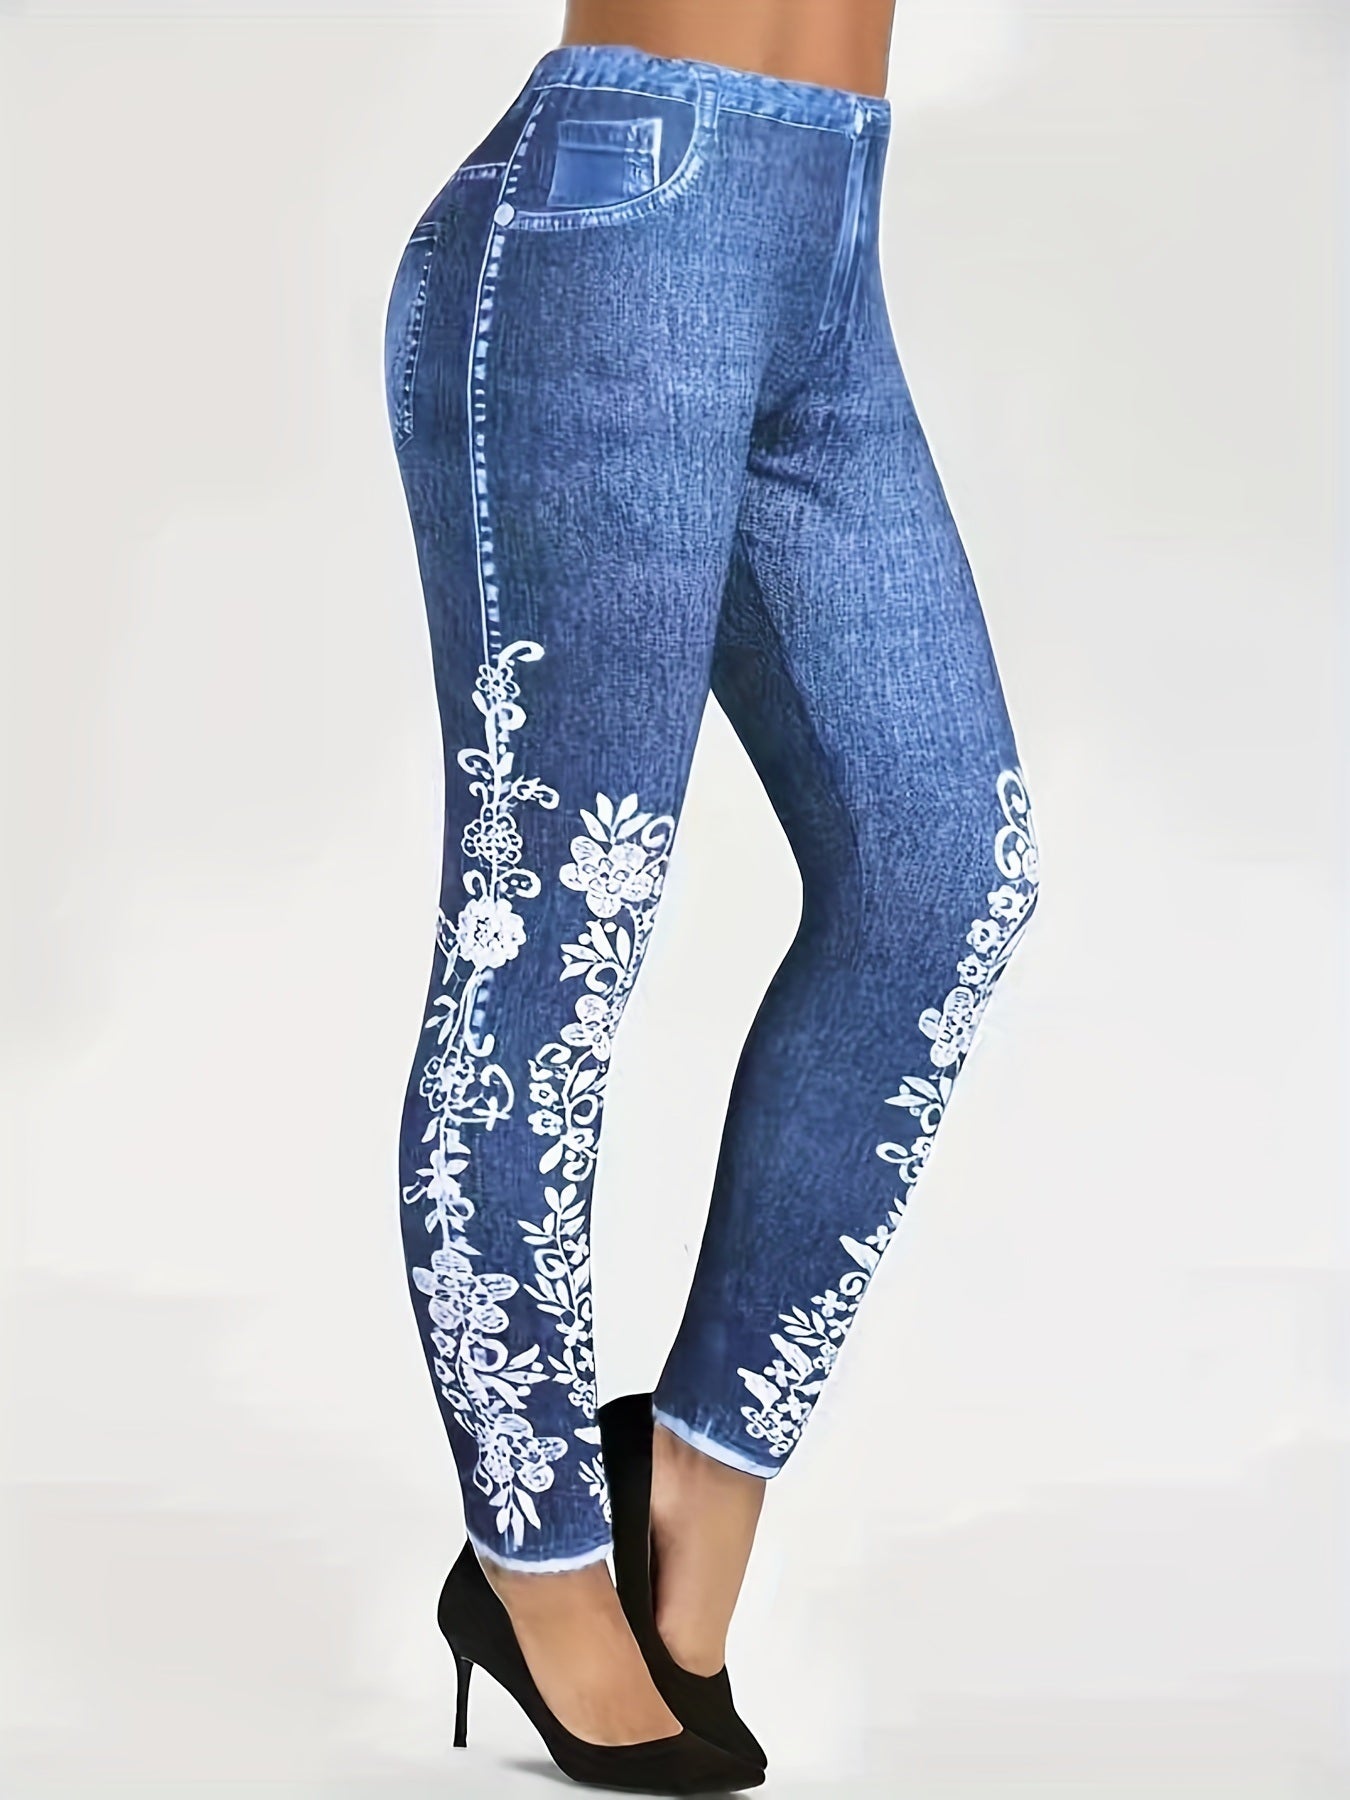 Plus Size Floral Print High Rise Leggings; Women's Plus Casual High Stretch Skinny Pants